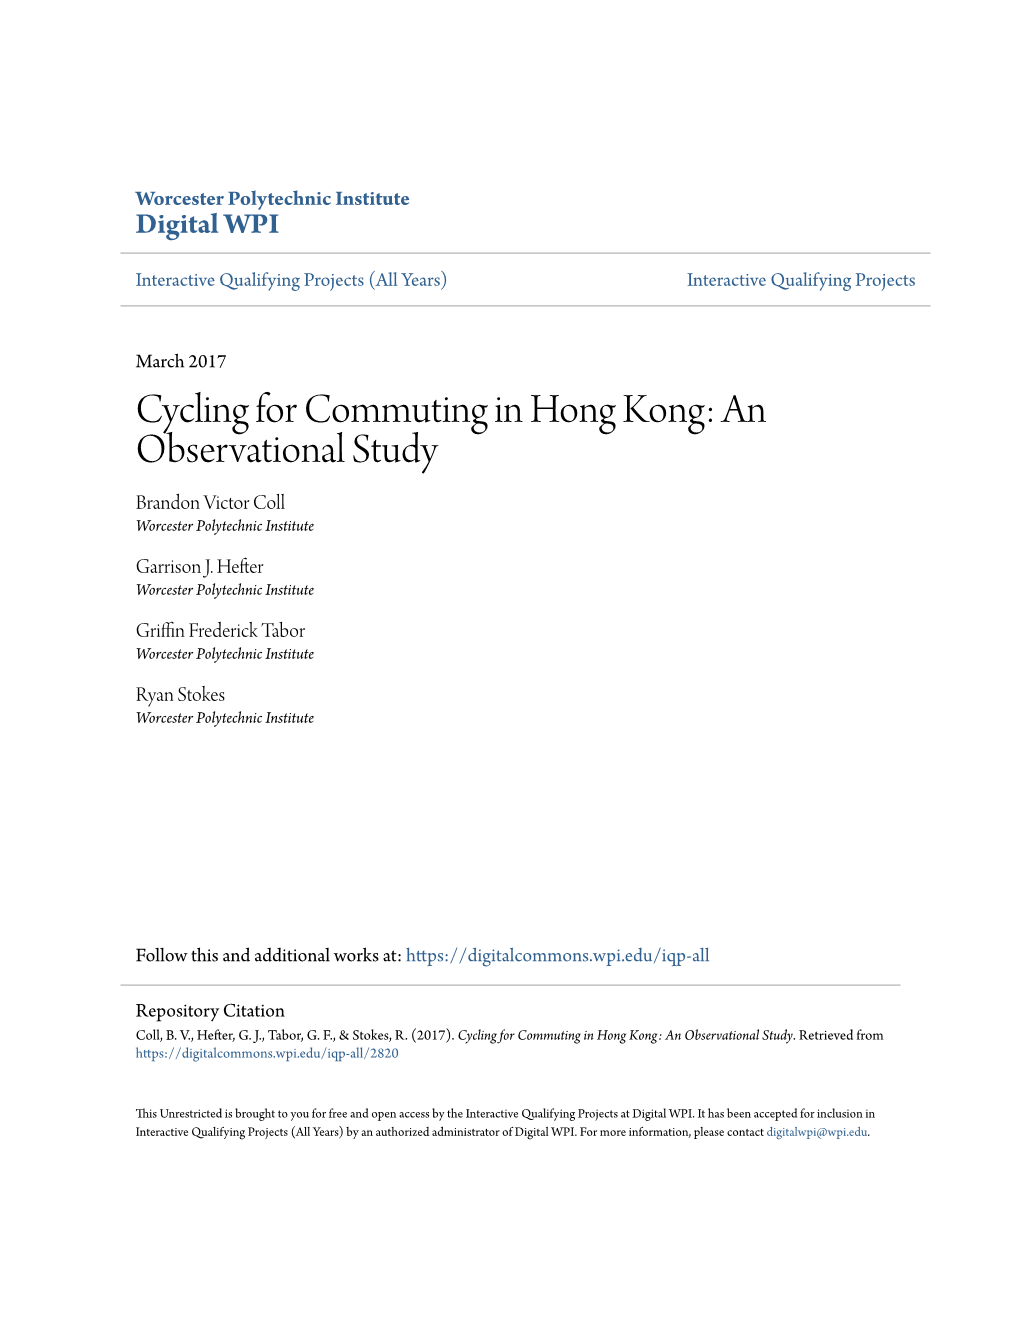 Cycling for Commuting in Hong Kong: an Observational Study Brandon Victor Coll Worcester Polytechnic Institute